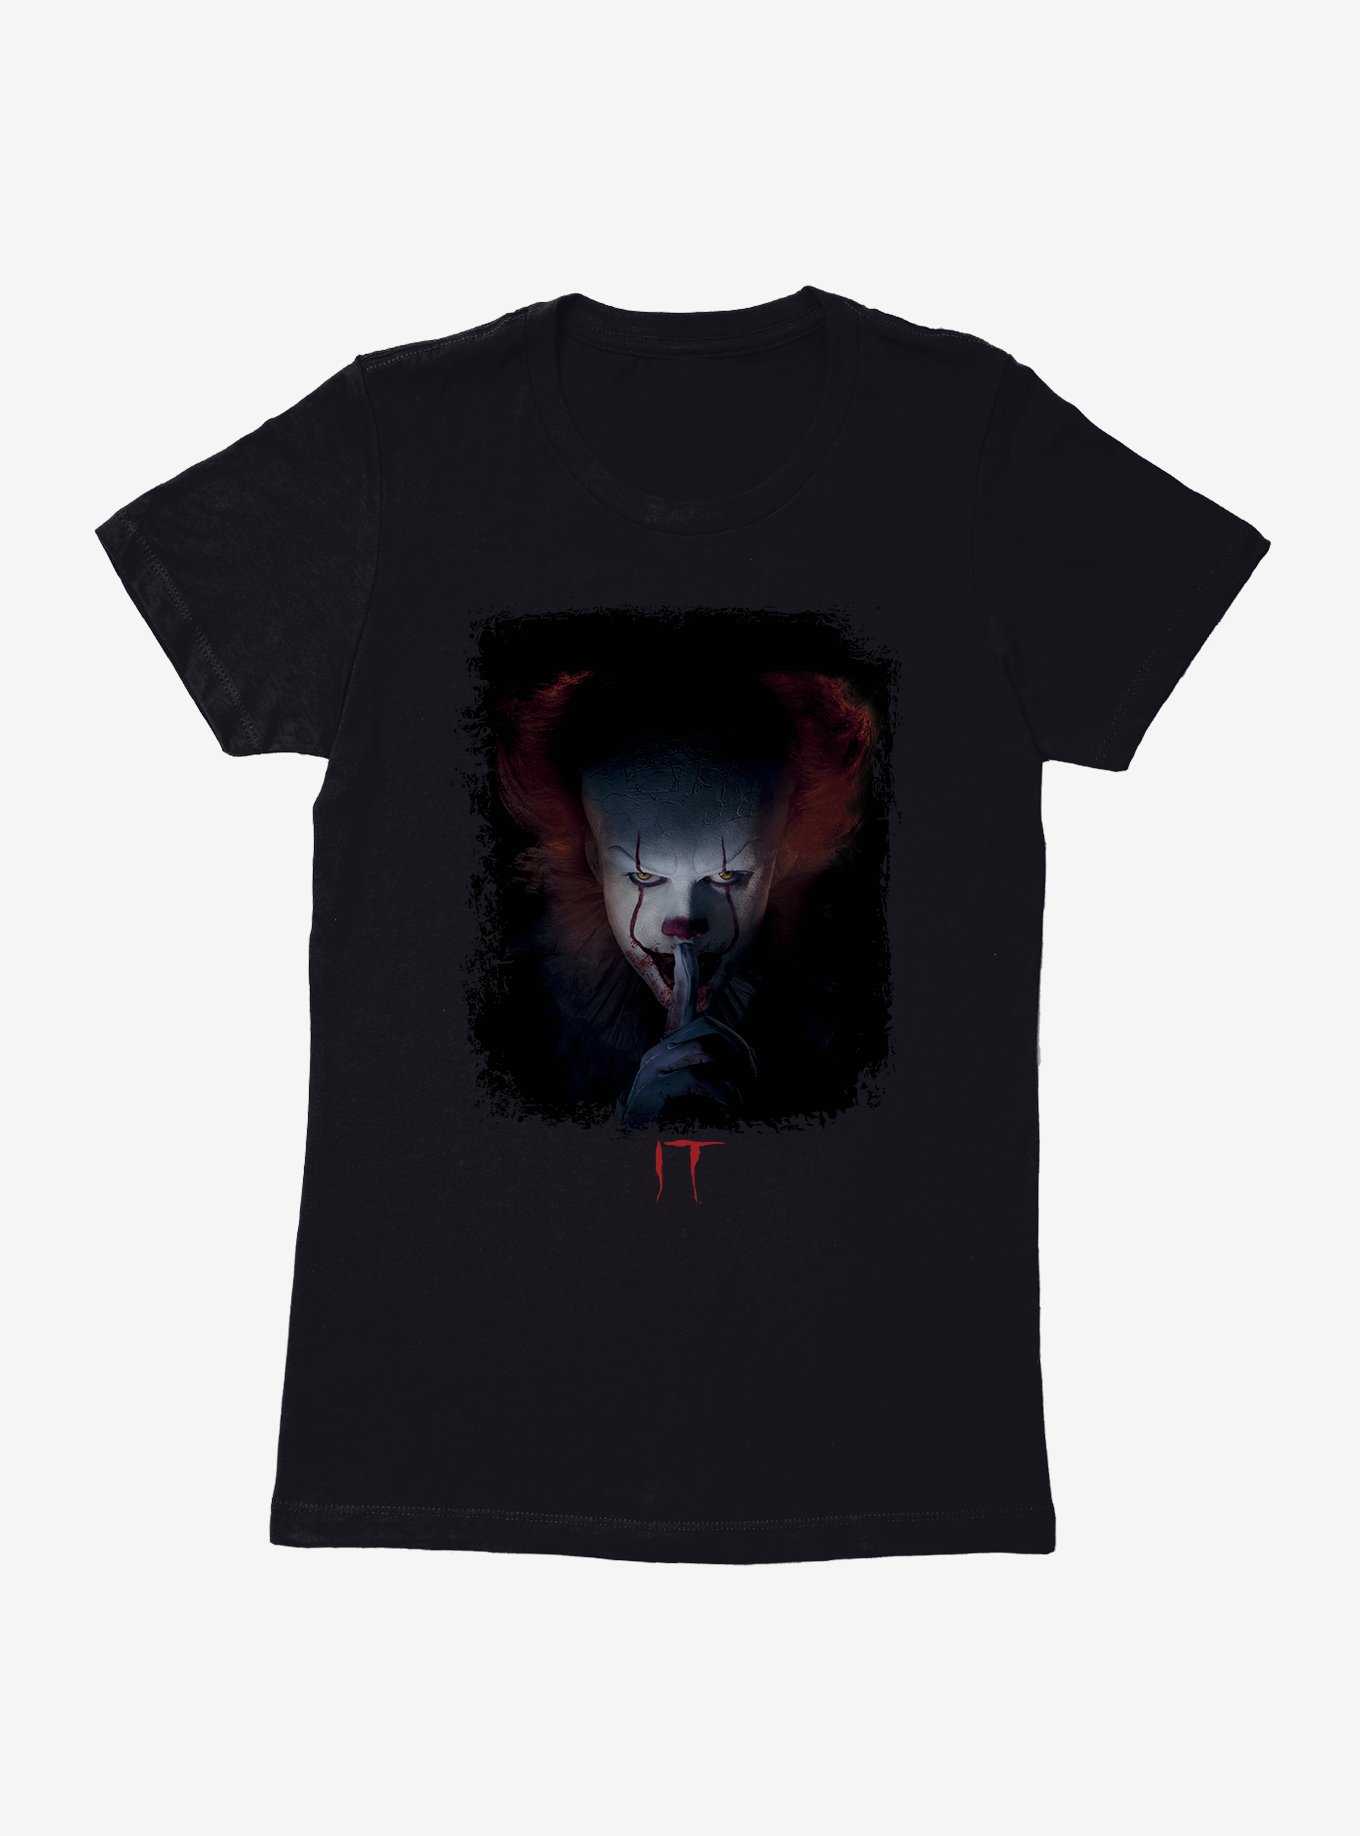 IT Pennywise Hush Womens T-Shirt, , hi-res